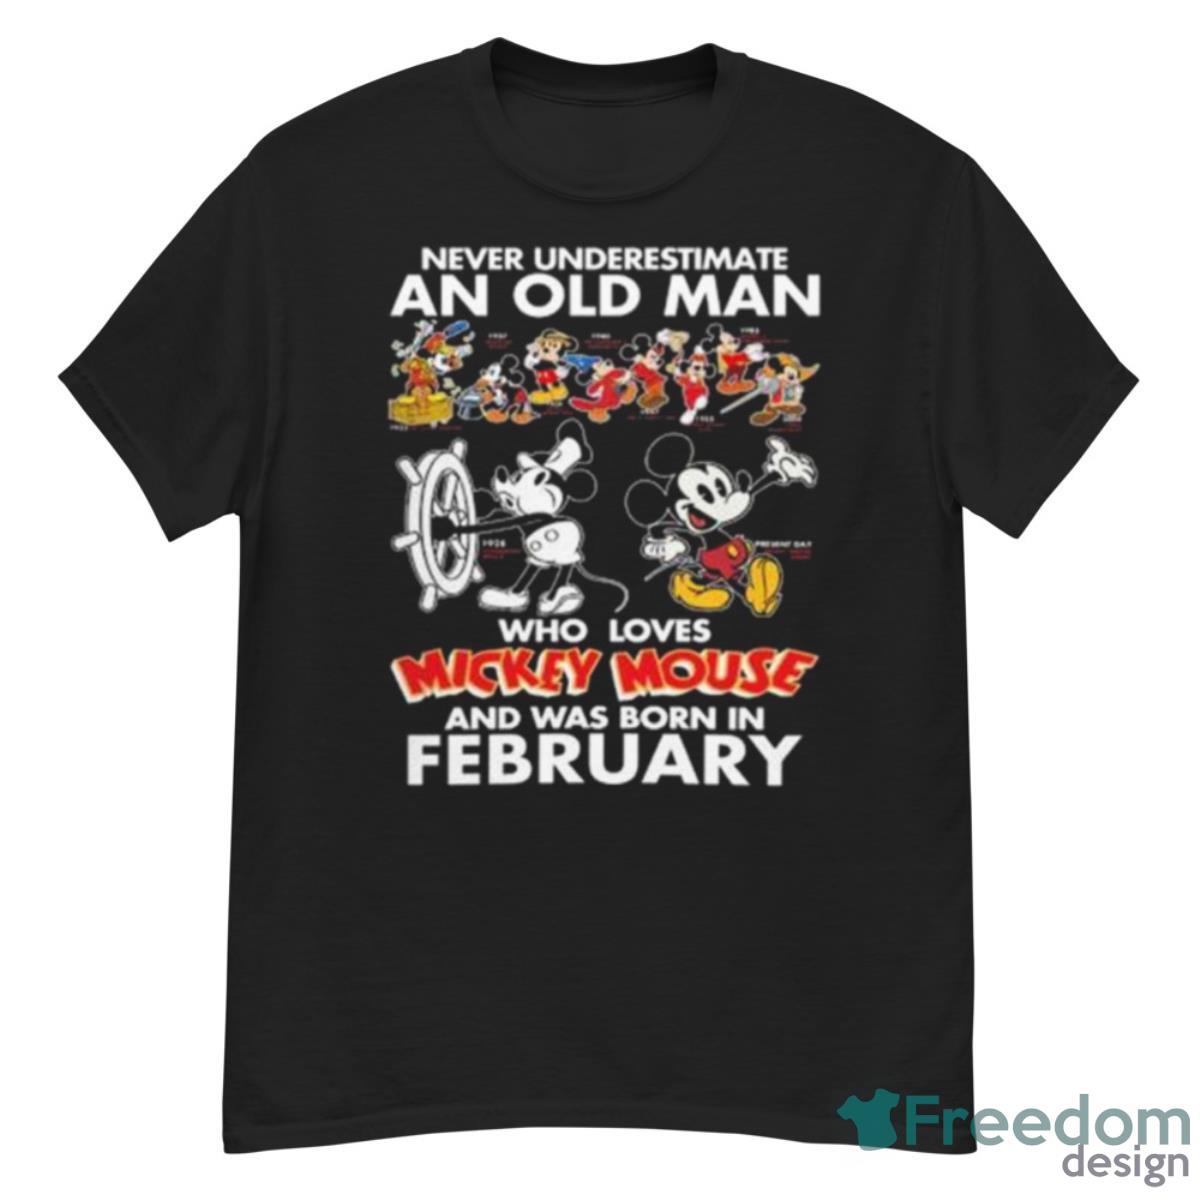 Never Underestimate An Old Man Who Loves Mickey Mouse And Was Born In February Shirt - G500 Men’s Classic T-Shirt